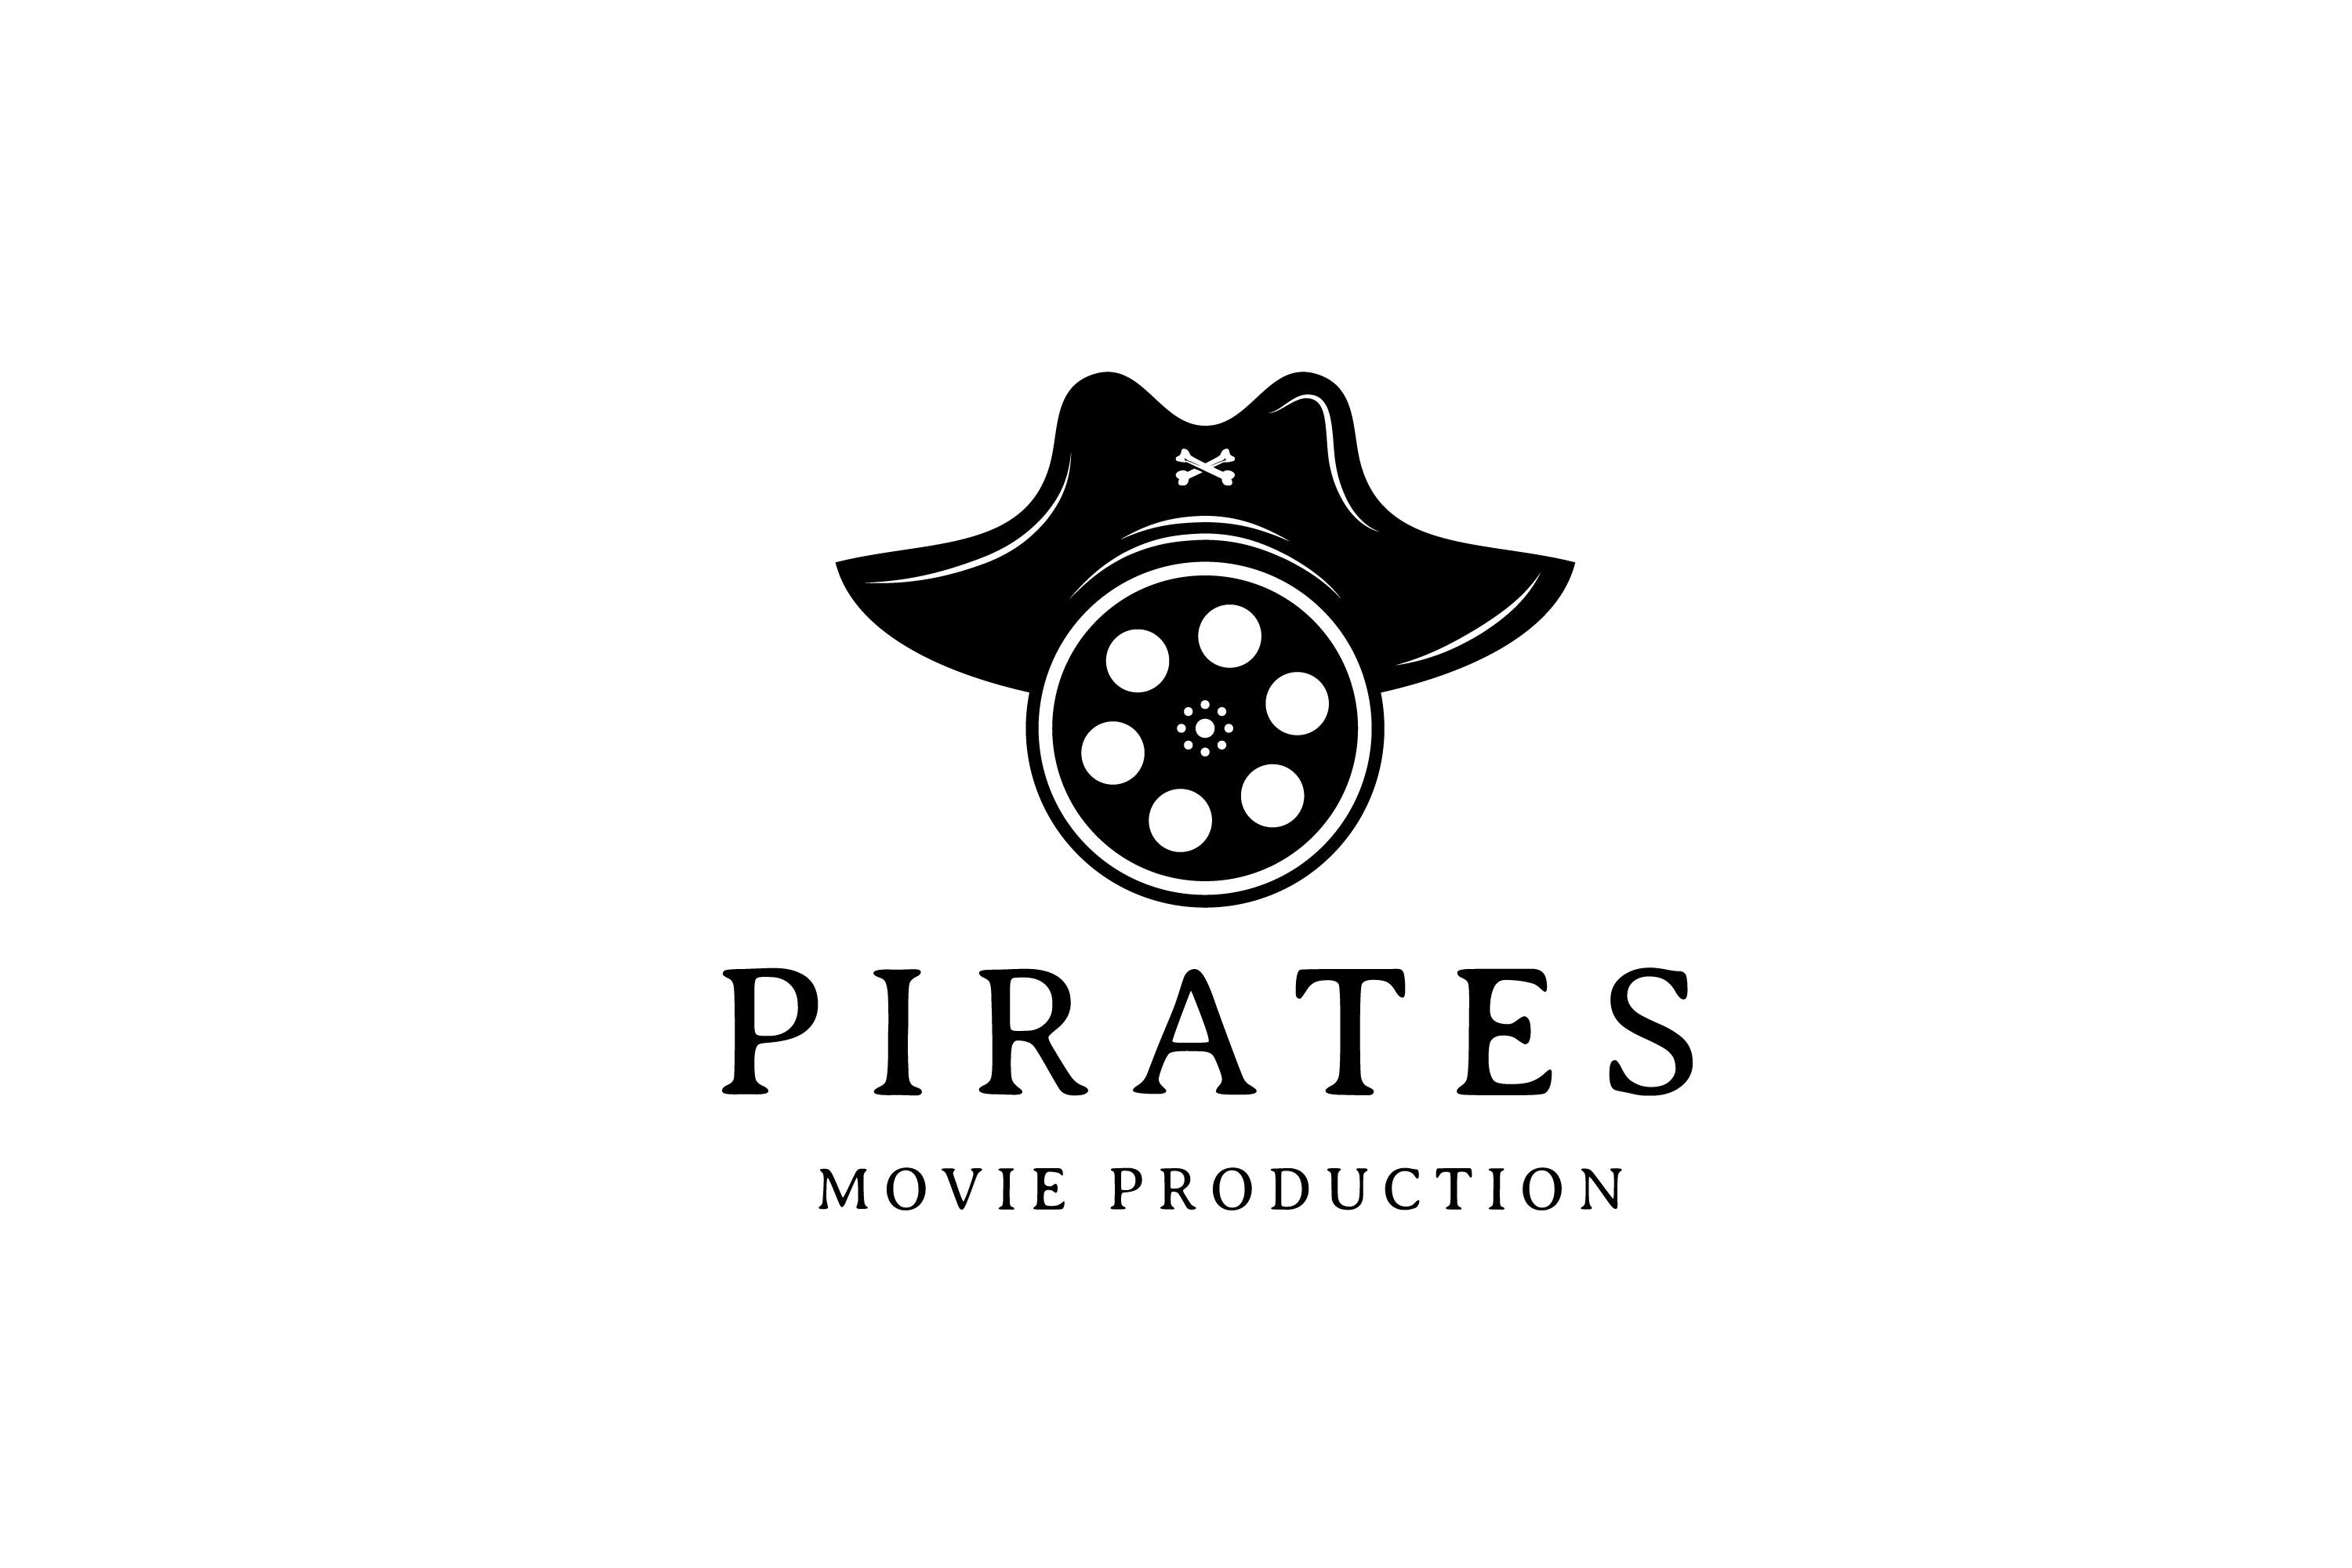 Pirates Hat with Film Reel for Movie Production Logo Design By weasley99